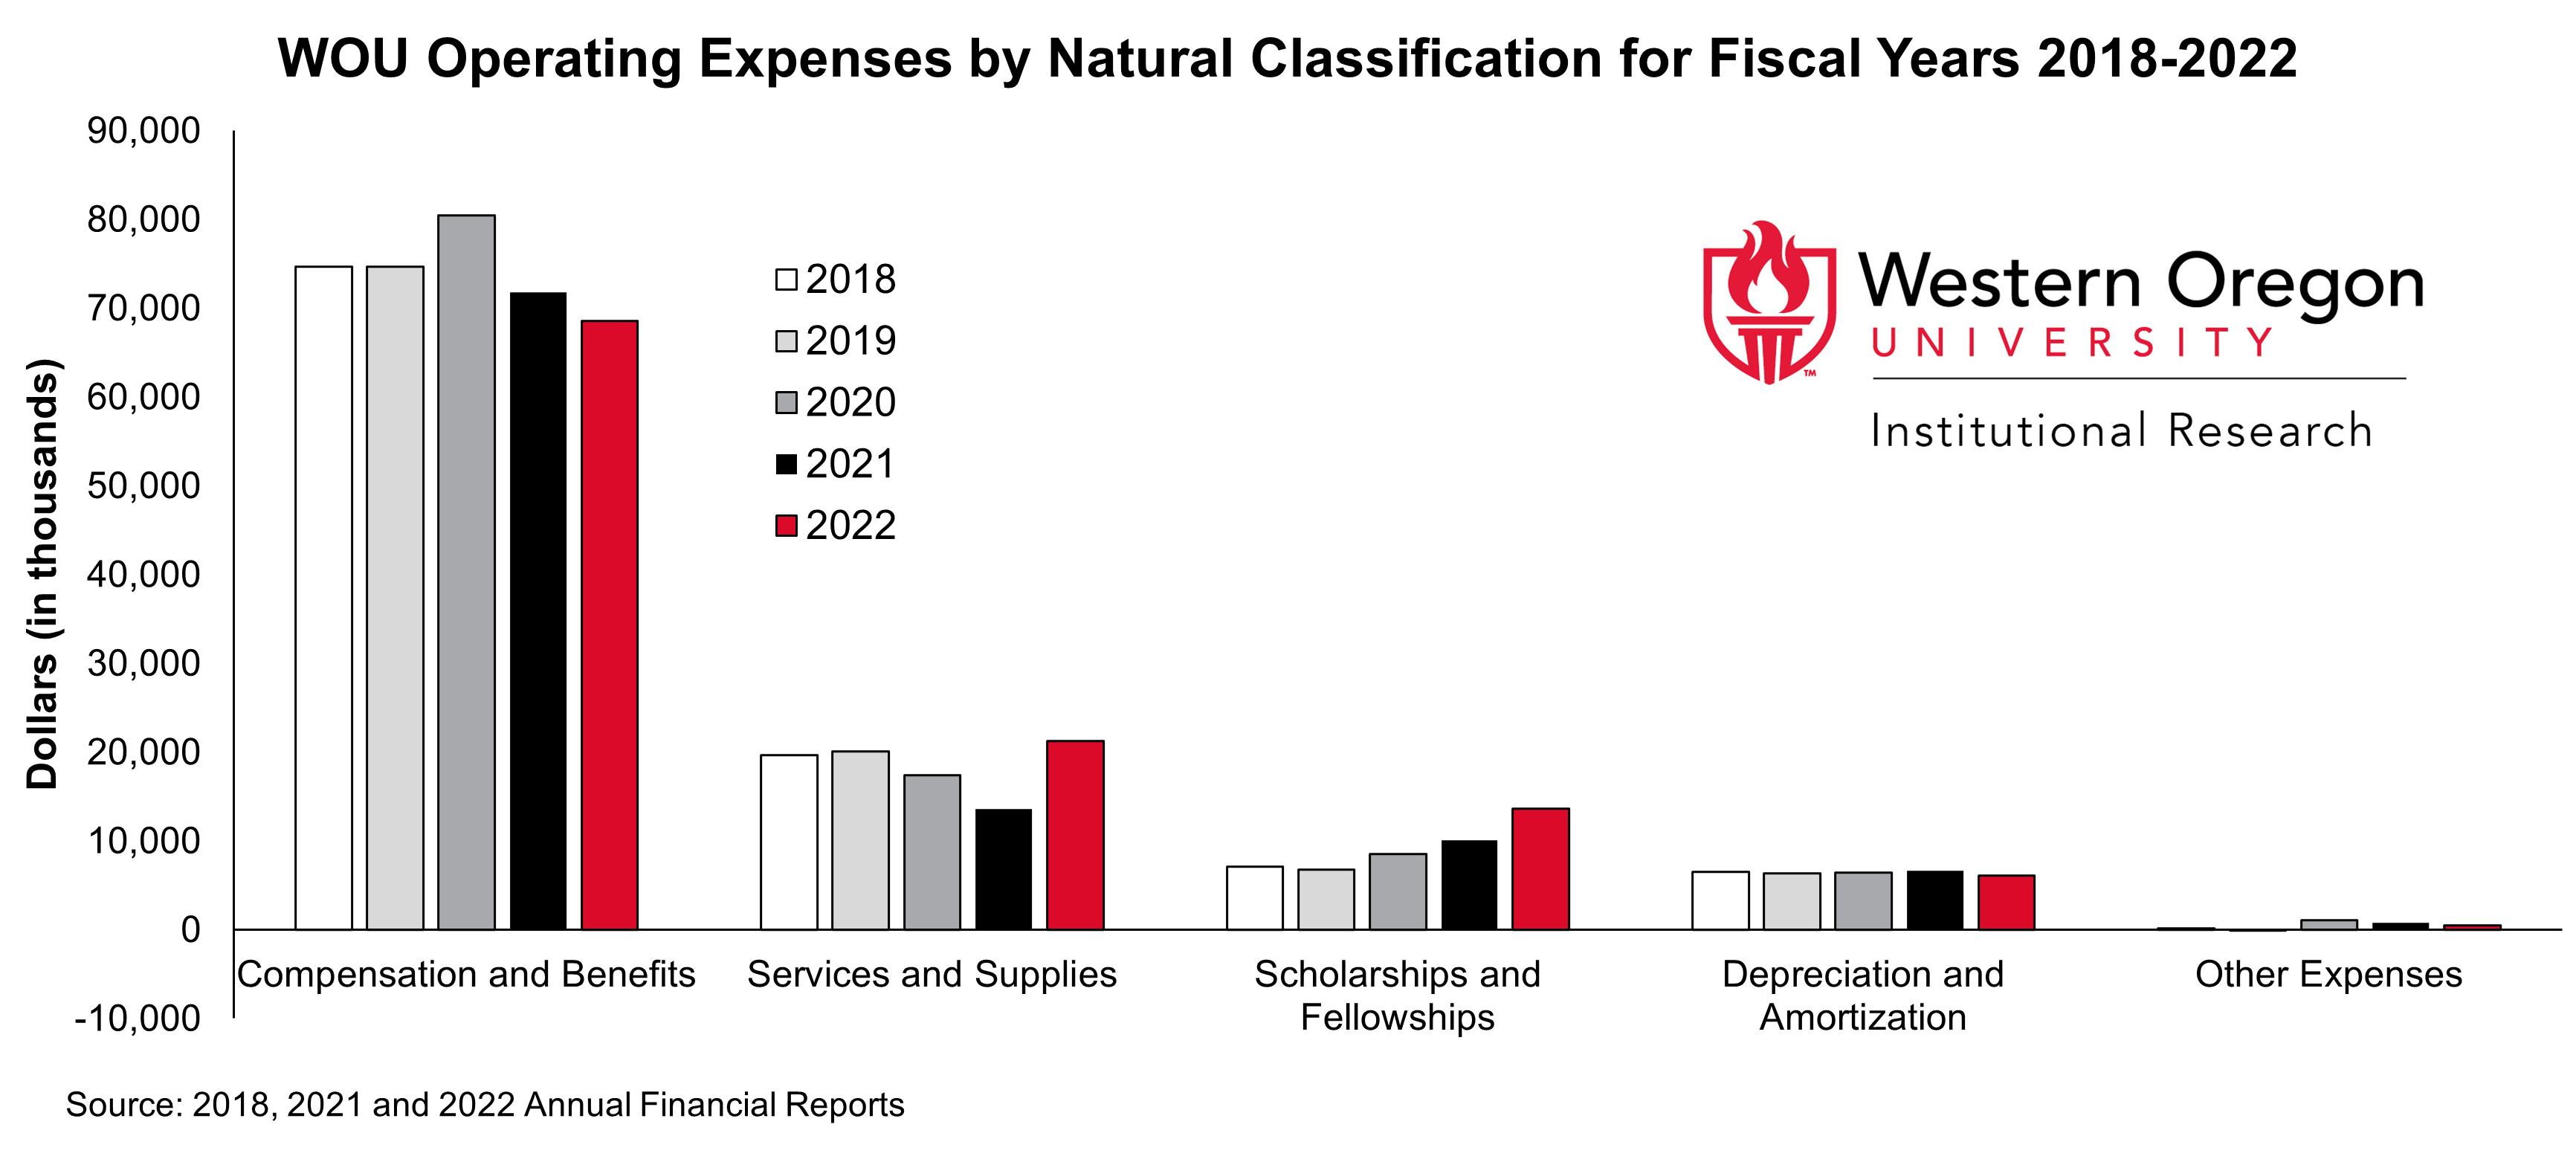 Bar graph of operating expenses at WOU since 2018, broken out by natural classification, showing that compenstation and benefits are the largest expense category.